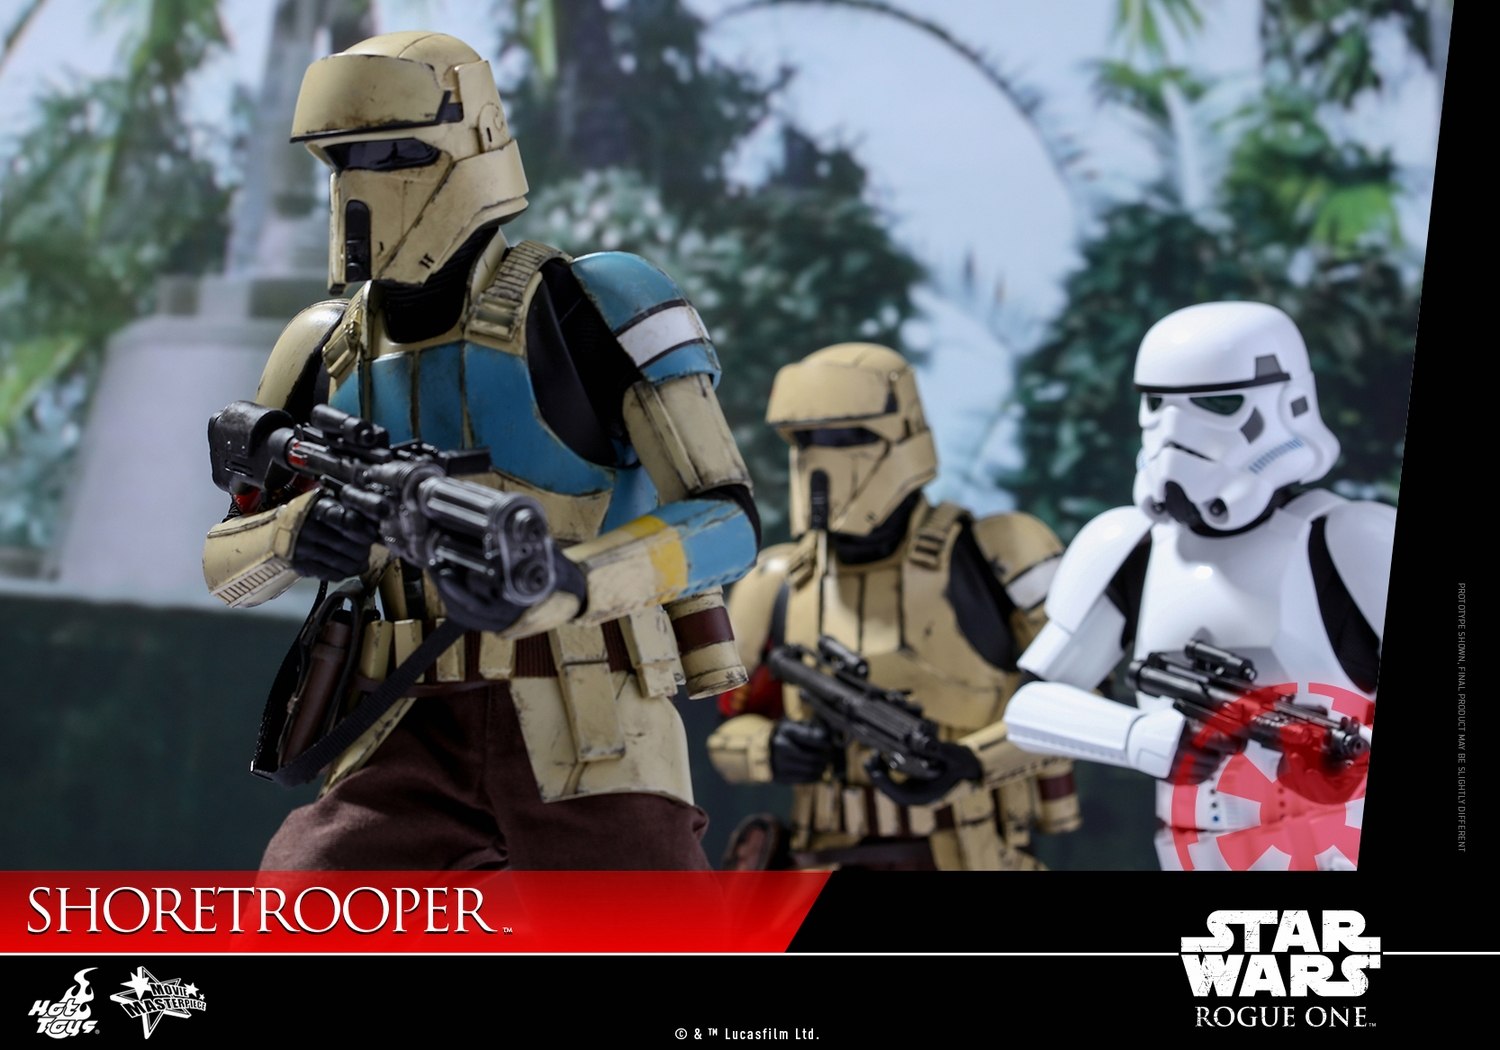 hot-toys-star-wars-rogue-one-shoretrooper-collectible-figure-092916-011.jpg